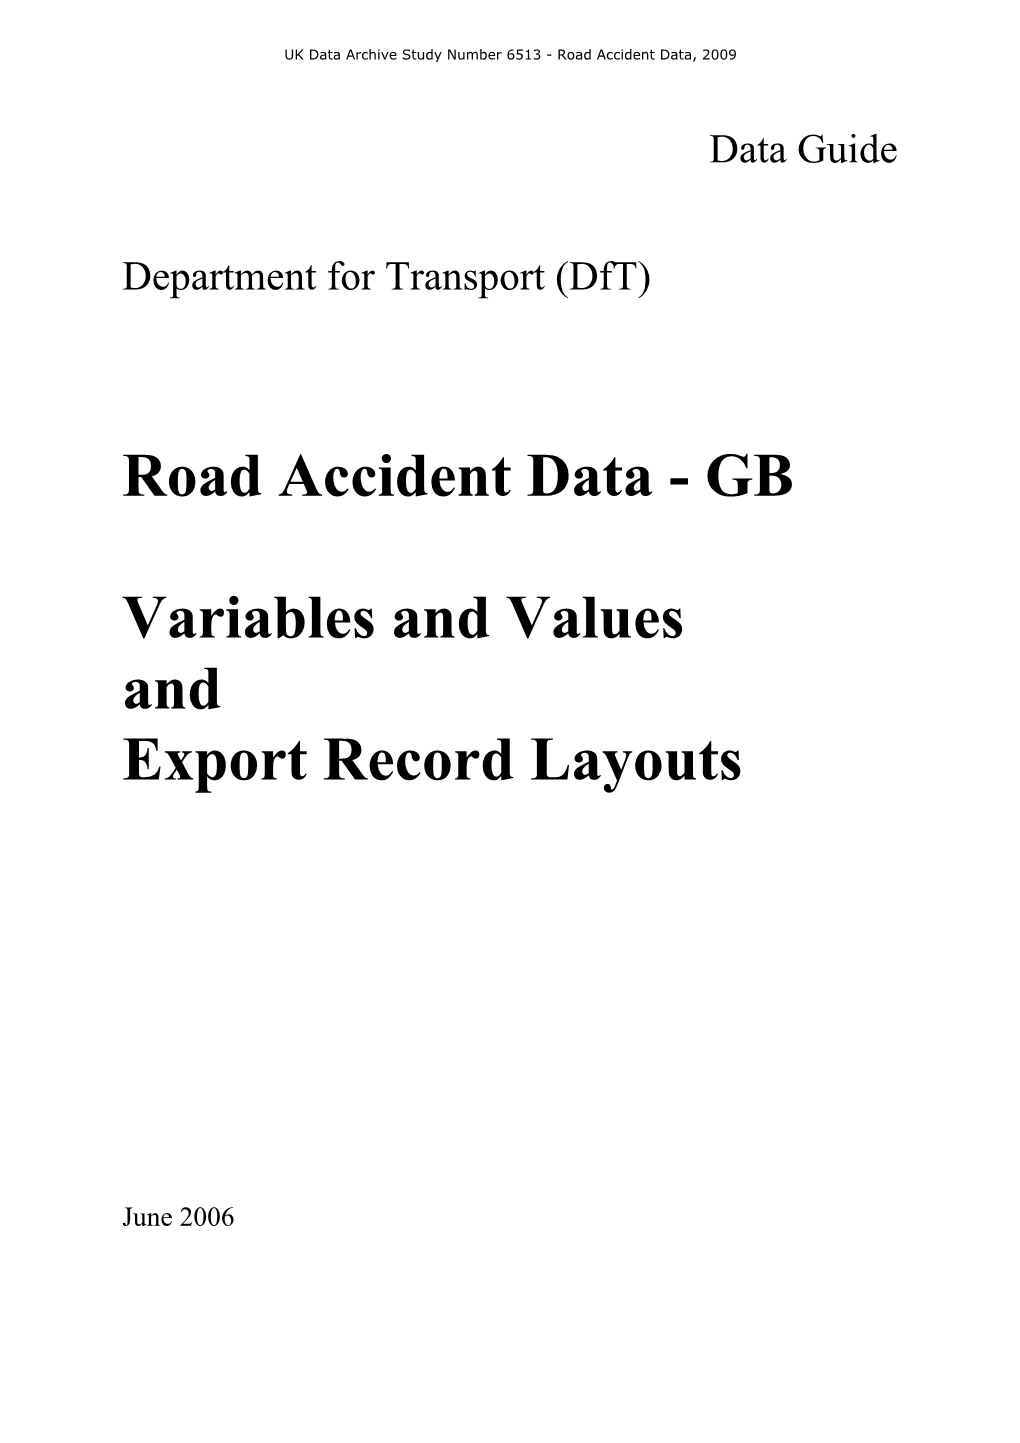 Road Accident Data User Guide